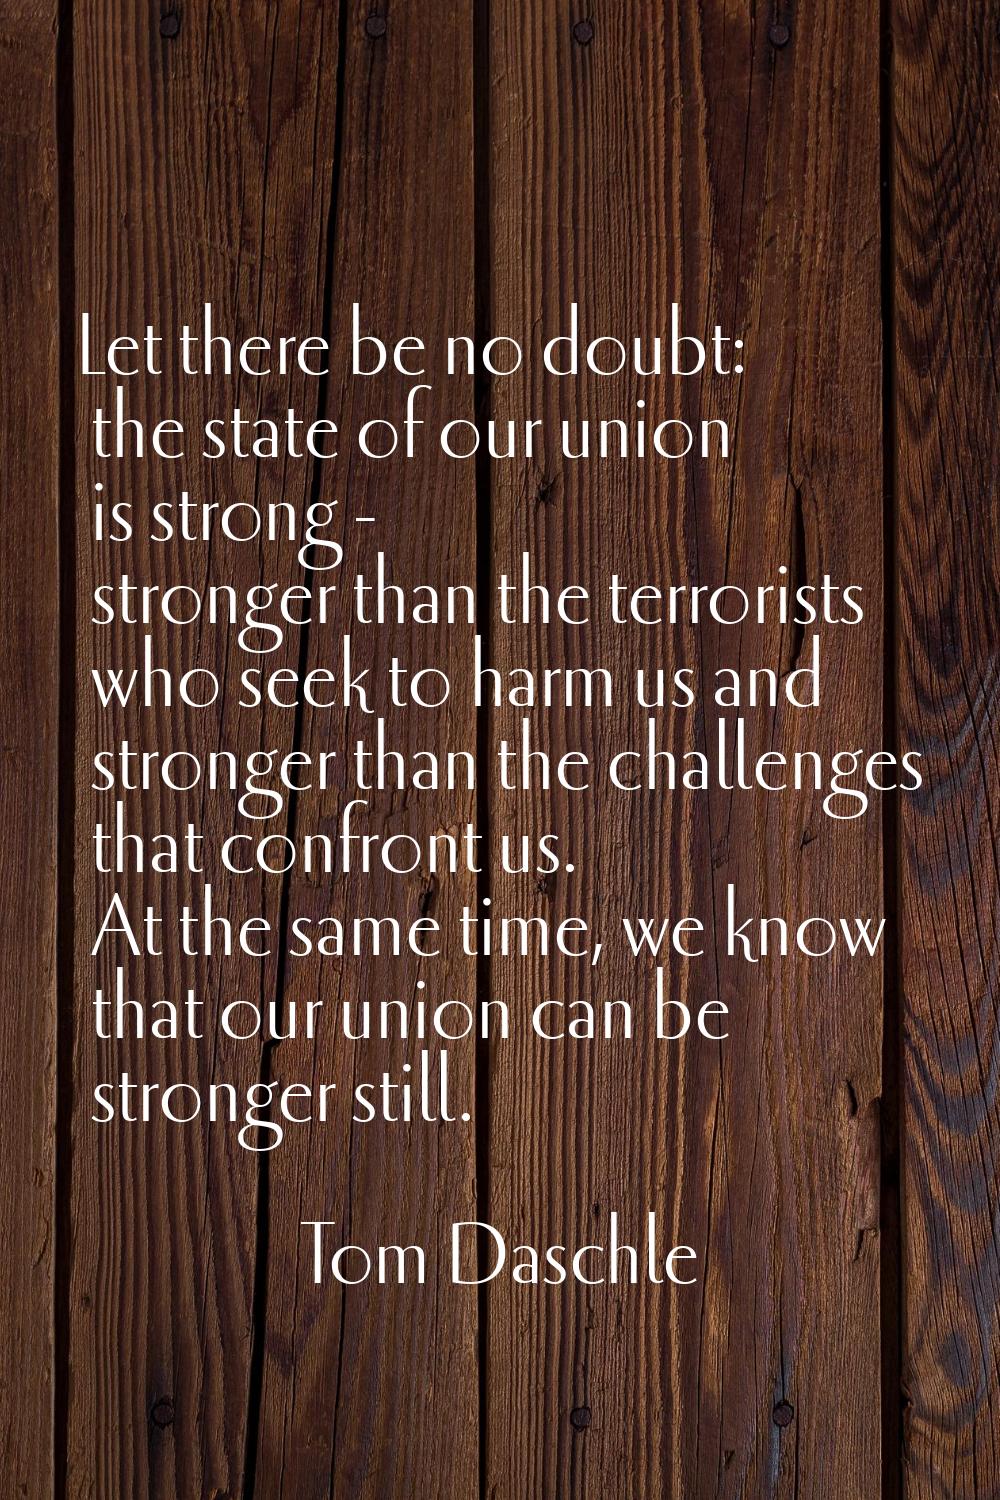 Let there be no doubt: the state of our union is strong - stronger than the terrorists who seek to 